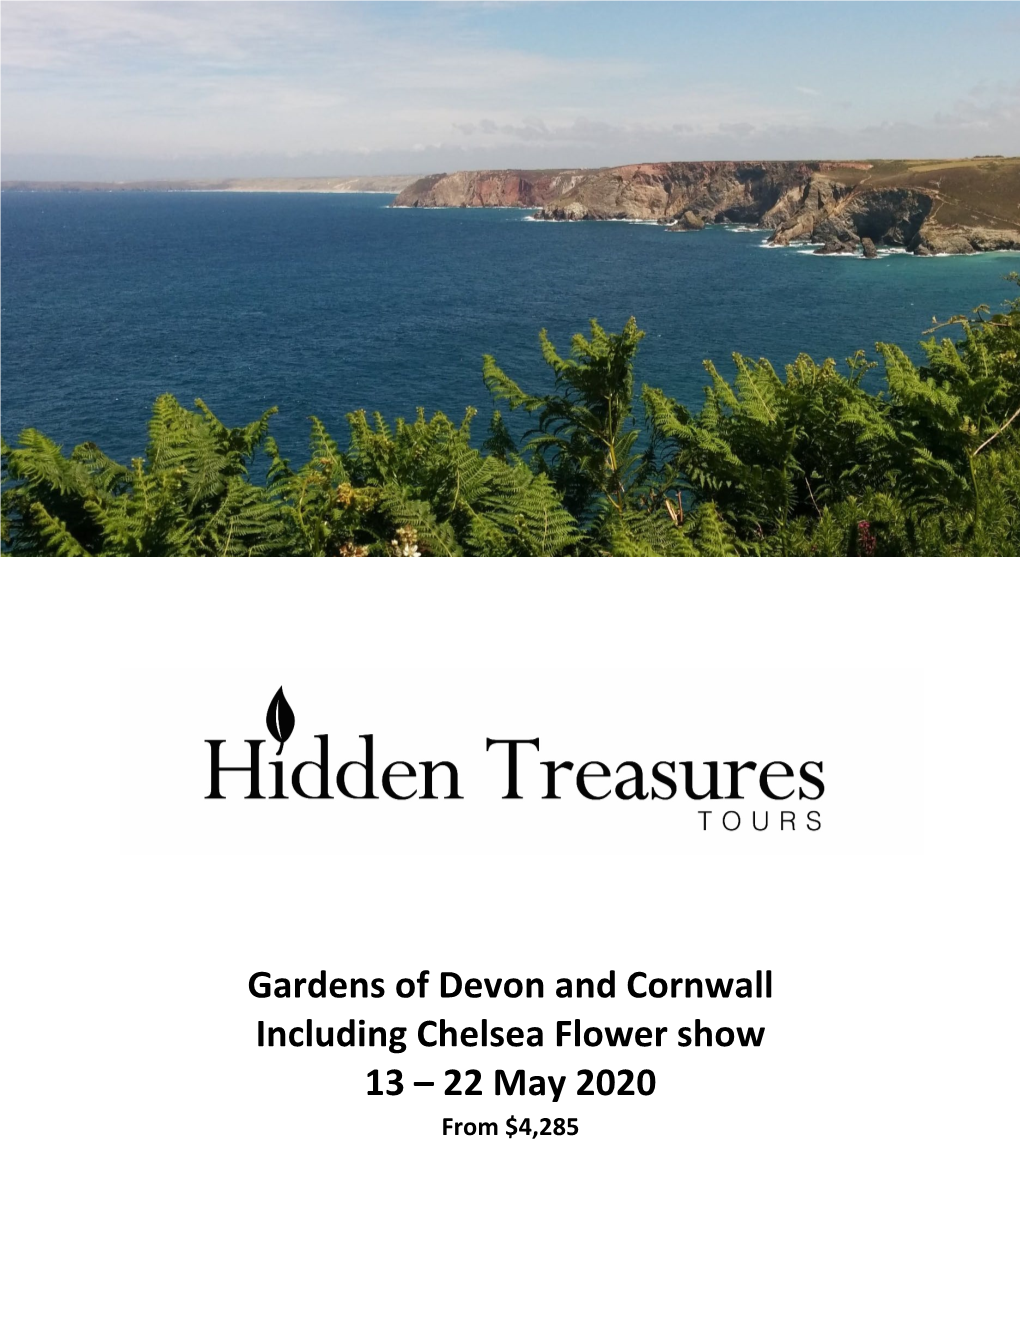 Gardens of Devon and Cornwall Including Chelsea Flower Show 13 – 22 May 2020 from $4,285